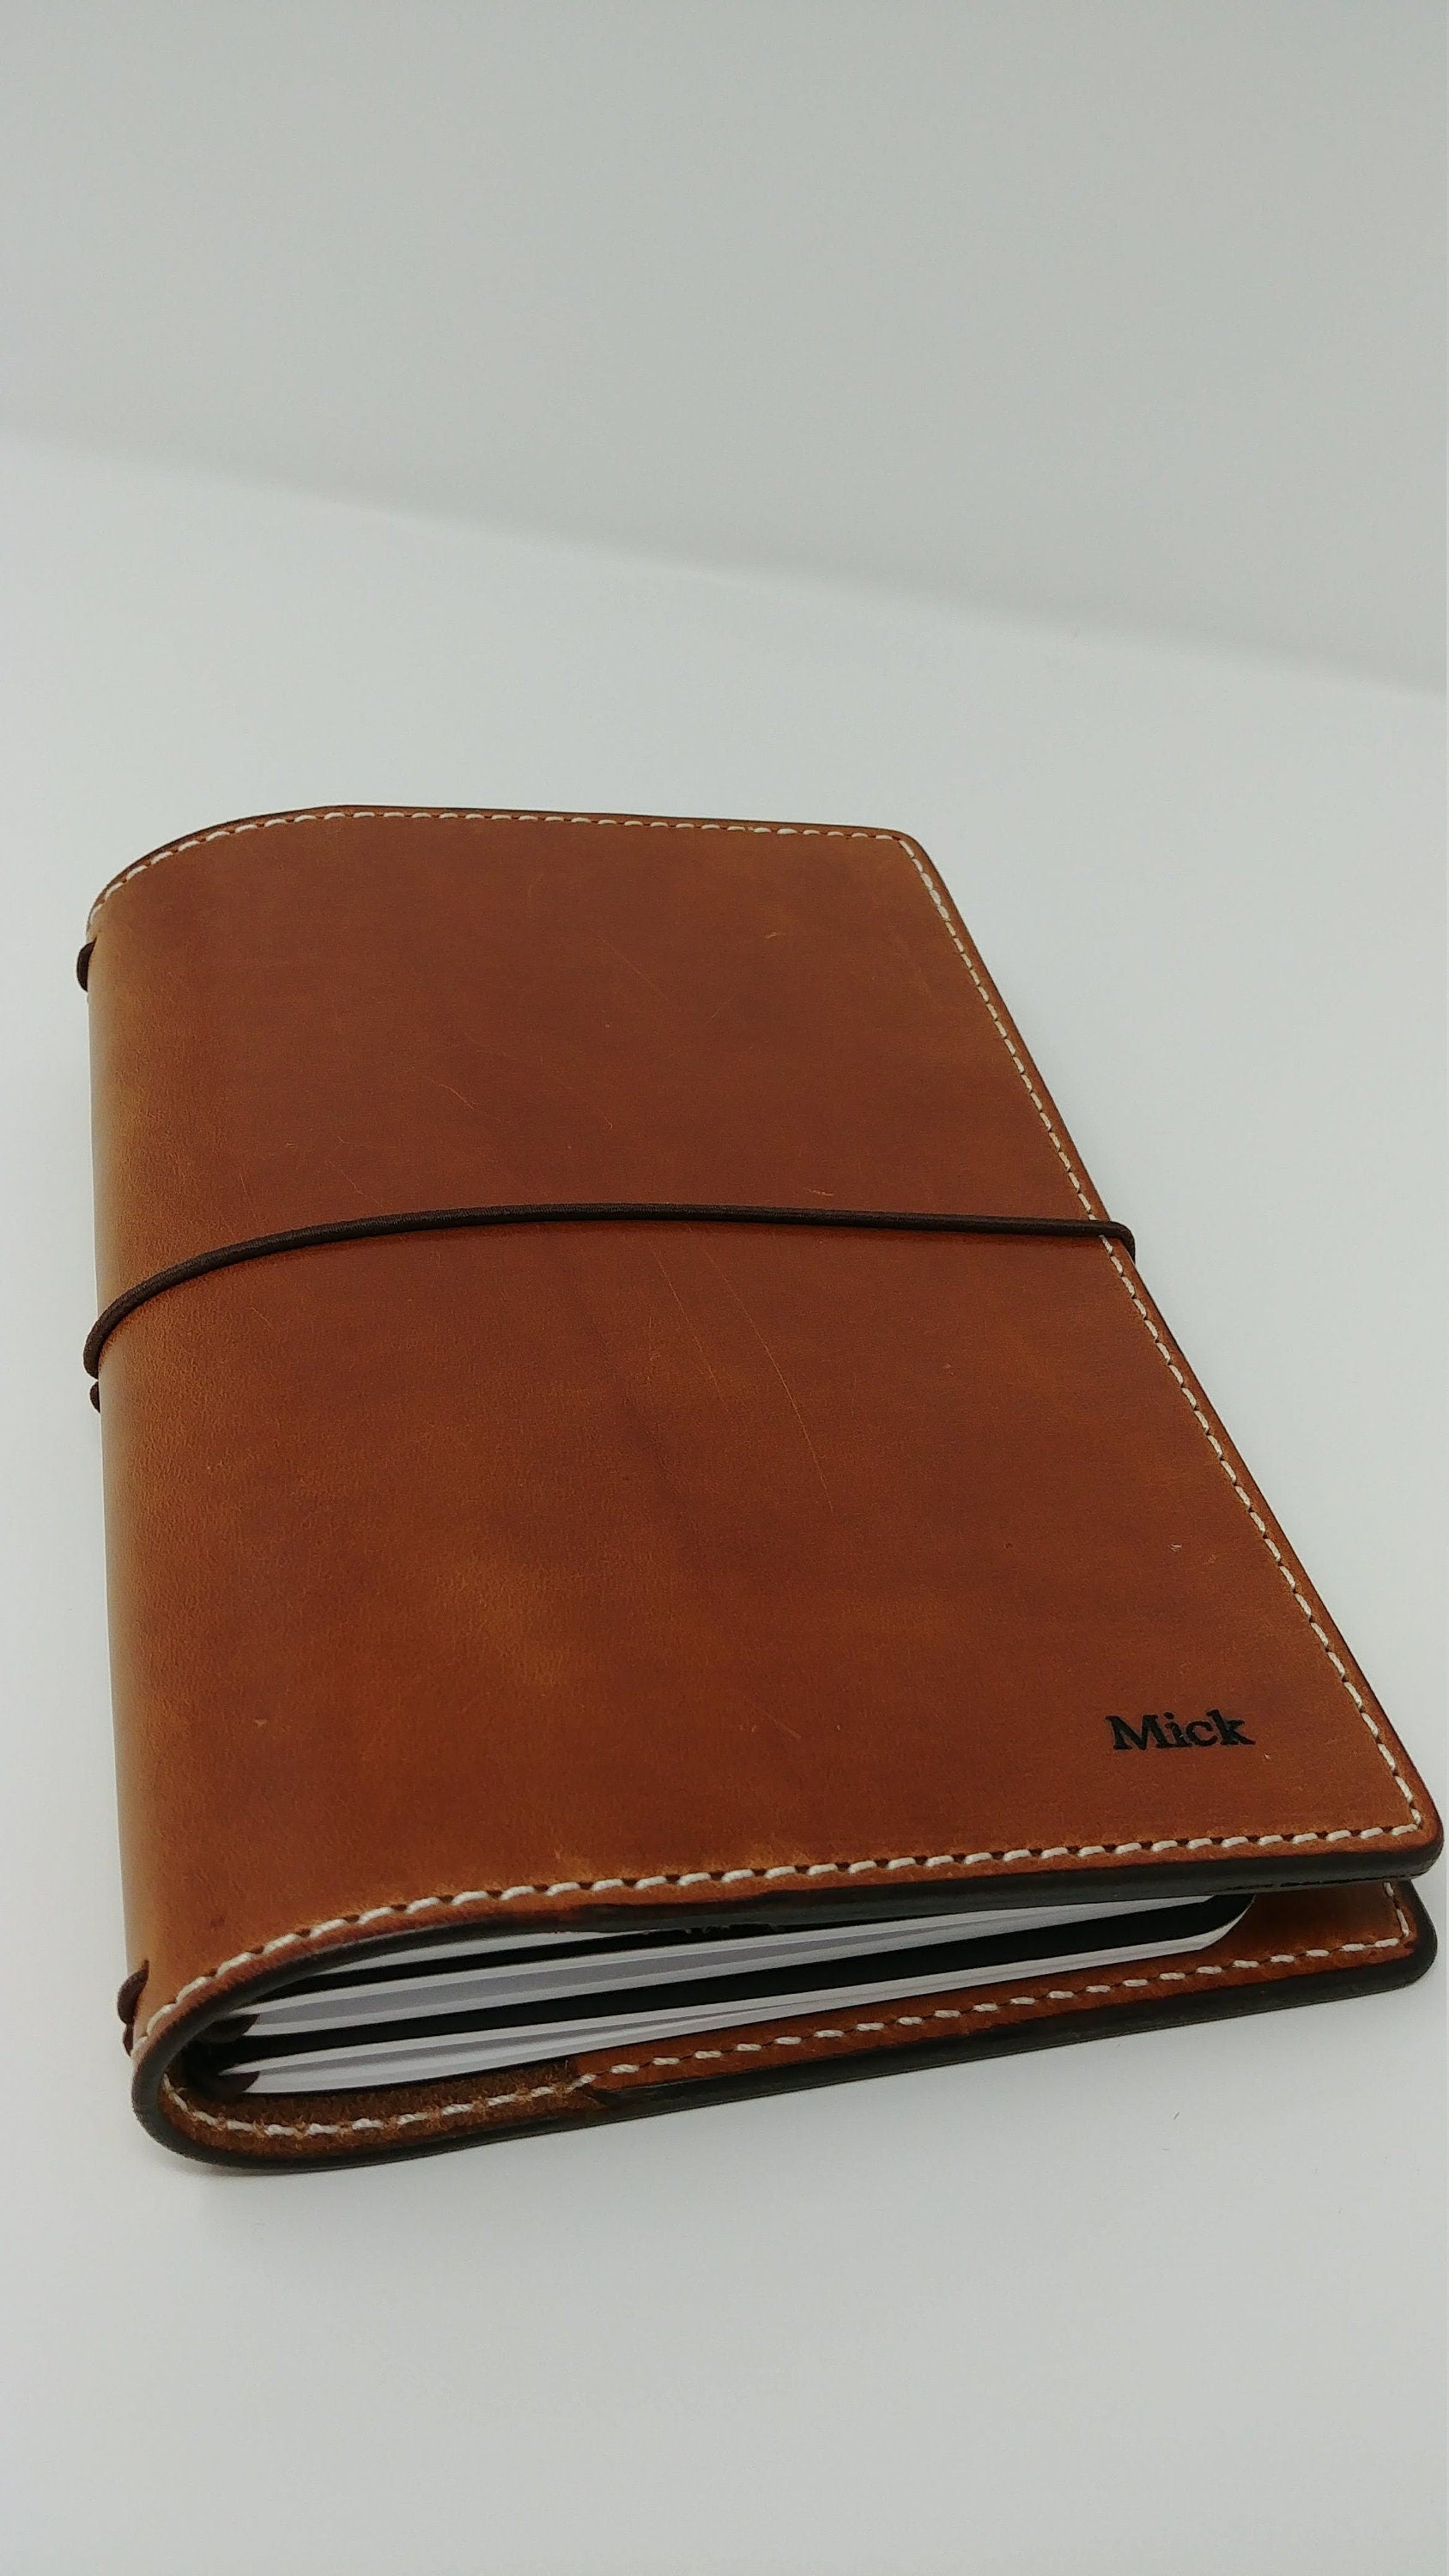 Leather Planner, B6 Traveler’s Notebook,  Deluxe w pockets & pen loop, Full Grain Leather Journal fits 5x7 Inserts, Upick leather finish